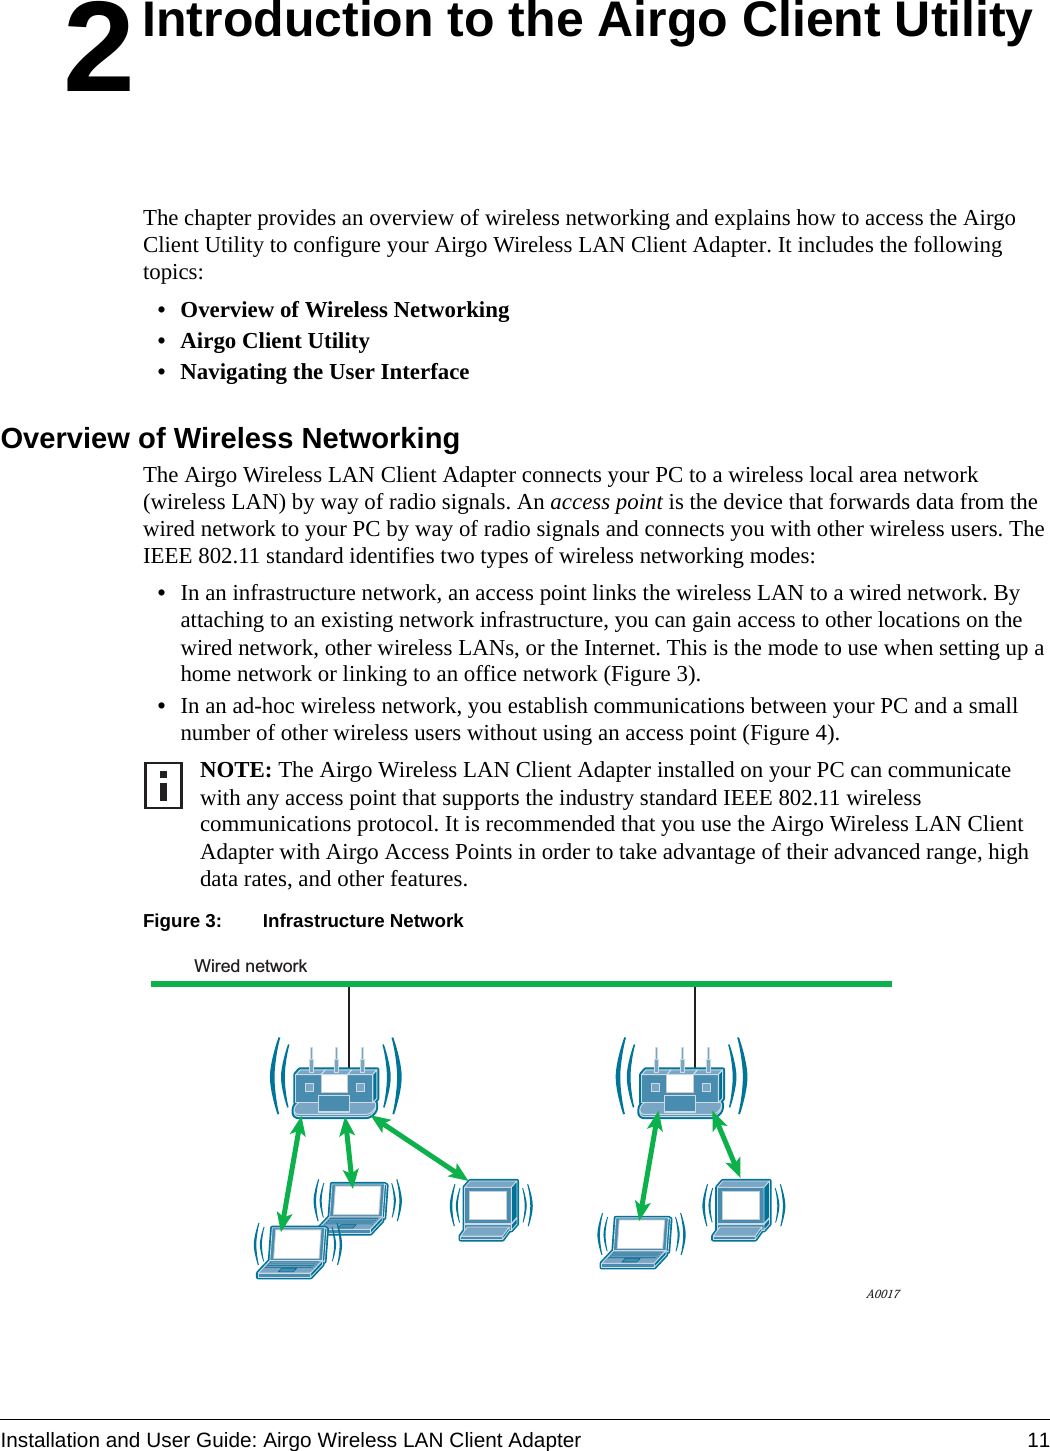 Installation and User Guide: Airgo Wireless LAN Client Adapter 112Introduction to the Airgo Client UtilityThe chapter provides an overview of wireless networking and explains how to access the Airgo Client Utility to configure your Airgo Wireless LAN Client Adapter. It includes the following topics:• Overview of Wireless Networking• Airgo Client Utility• Navigating the User InterfaceOverview of Wireless NetworkingThe Airgo Wireless LAN Client Adapter connects your PC to a wireless local area network (wireless LAN) by way of radio signals. An access point is the device that forwards data from the wired network to your PC by way of radio signals and connects you with other wireless users. The IEEE 802.11 standard identifies two types of wireless networking modes:•In an infrastructure network, an access point links the wireless LAN to a wired network. By attaching to an existing network infrastructure, you can gain access to other locations on the wired network, other wireless LANs, or the Internet. This is the mode to use when setting up a home network or linking to an office network (Figure 3).•In an ad-hoc wireless network, you establish communications between your PC and a small number of other wireless users without using an access point (Figure 4). Figure 3: Infrastructure NetworkNOTE: The Airgo Wireless LAN Client Adapter installed on your PC can communicate with any access point that supports the industry standard IEEE 802.11 wireless communications protocol. It is recommended that you use the Airgo Wireless LAN Client Adapter with Airgo Access Points in order to take advantage of their advanced range, high data rates, and other features.Wired networkA0017